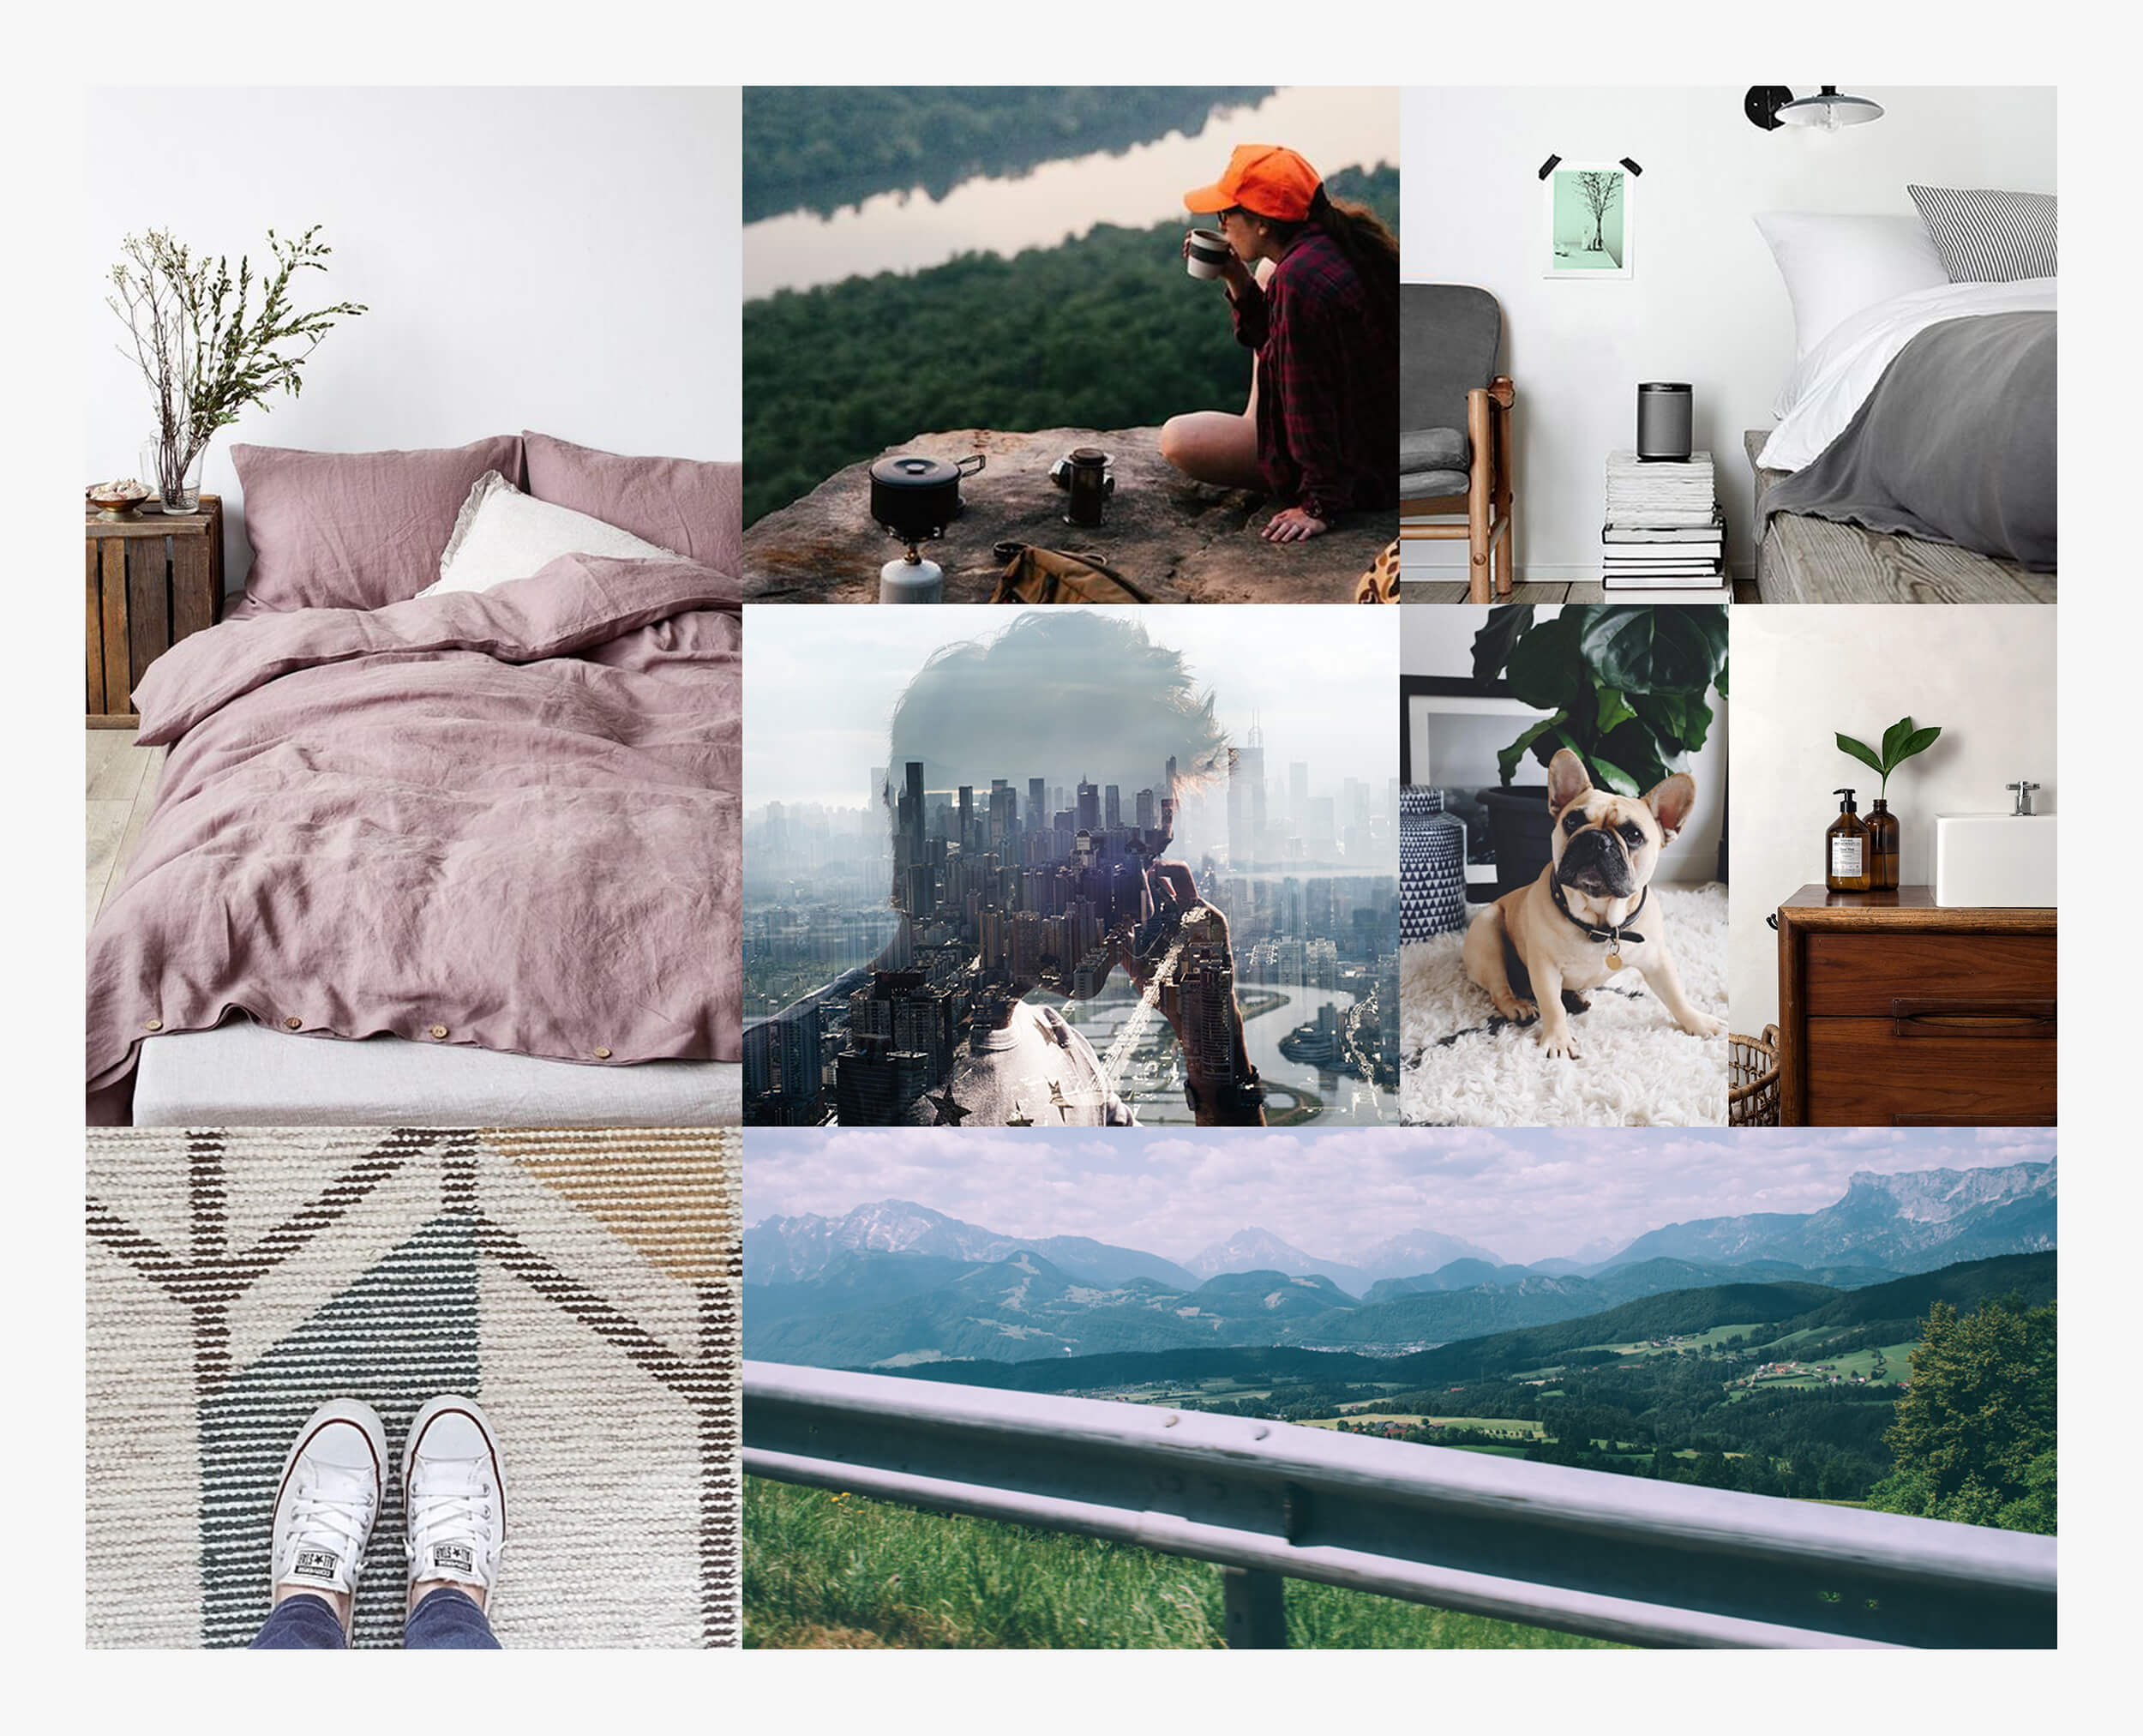 Moodboard titled Adventurer featuring imagery curated for Willow Bed as part of brand exploration